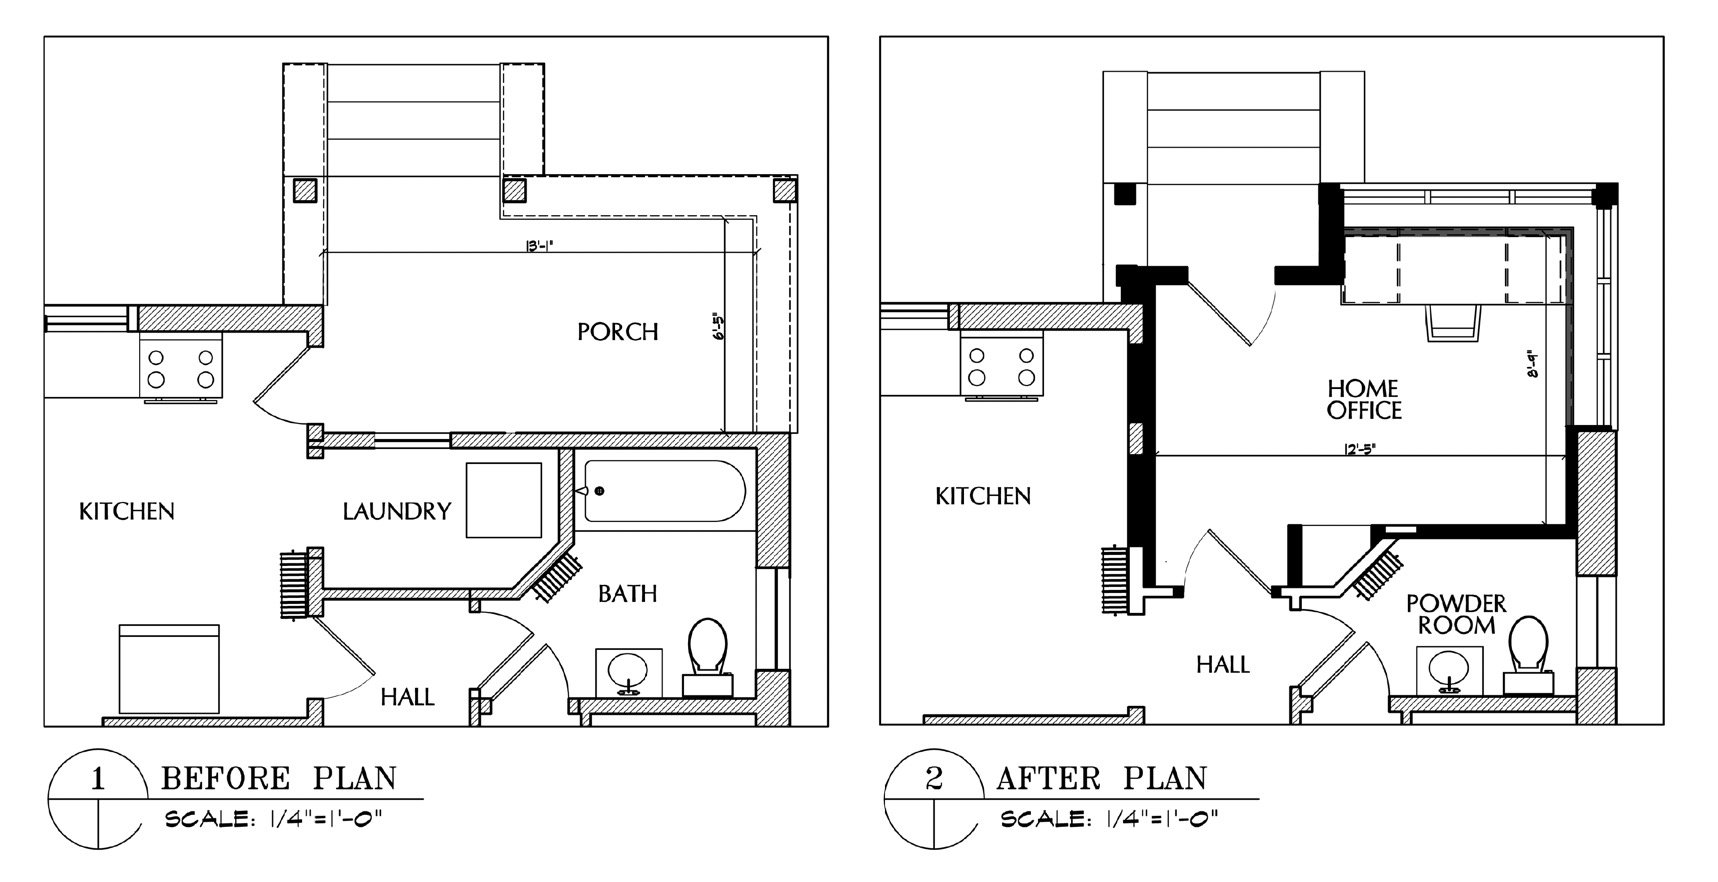 portch-plans-before-after